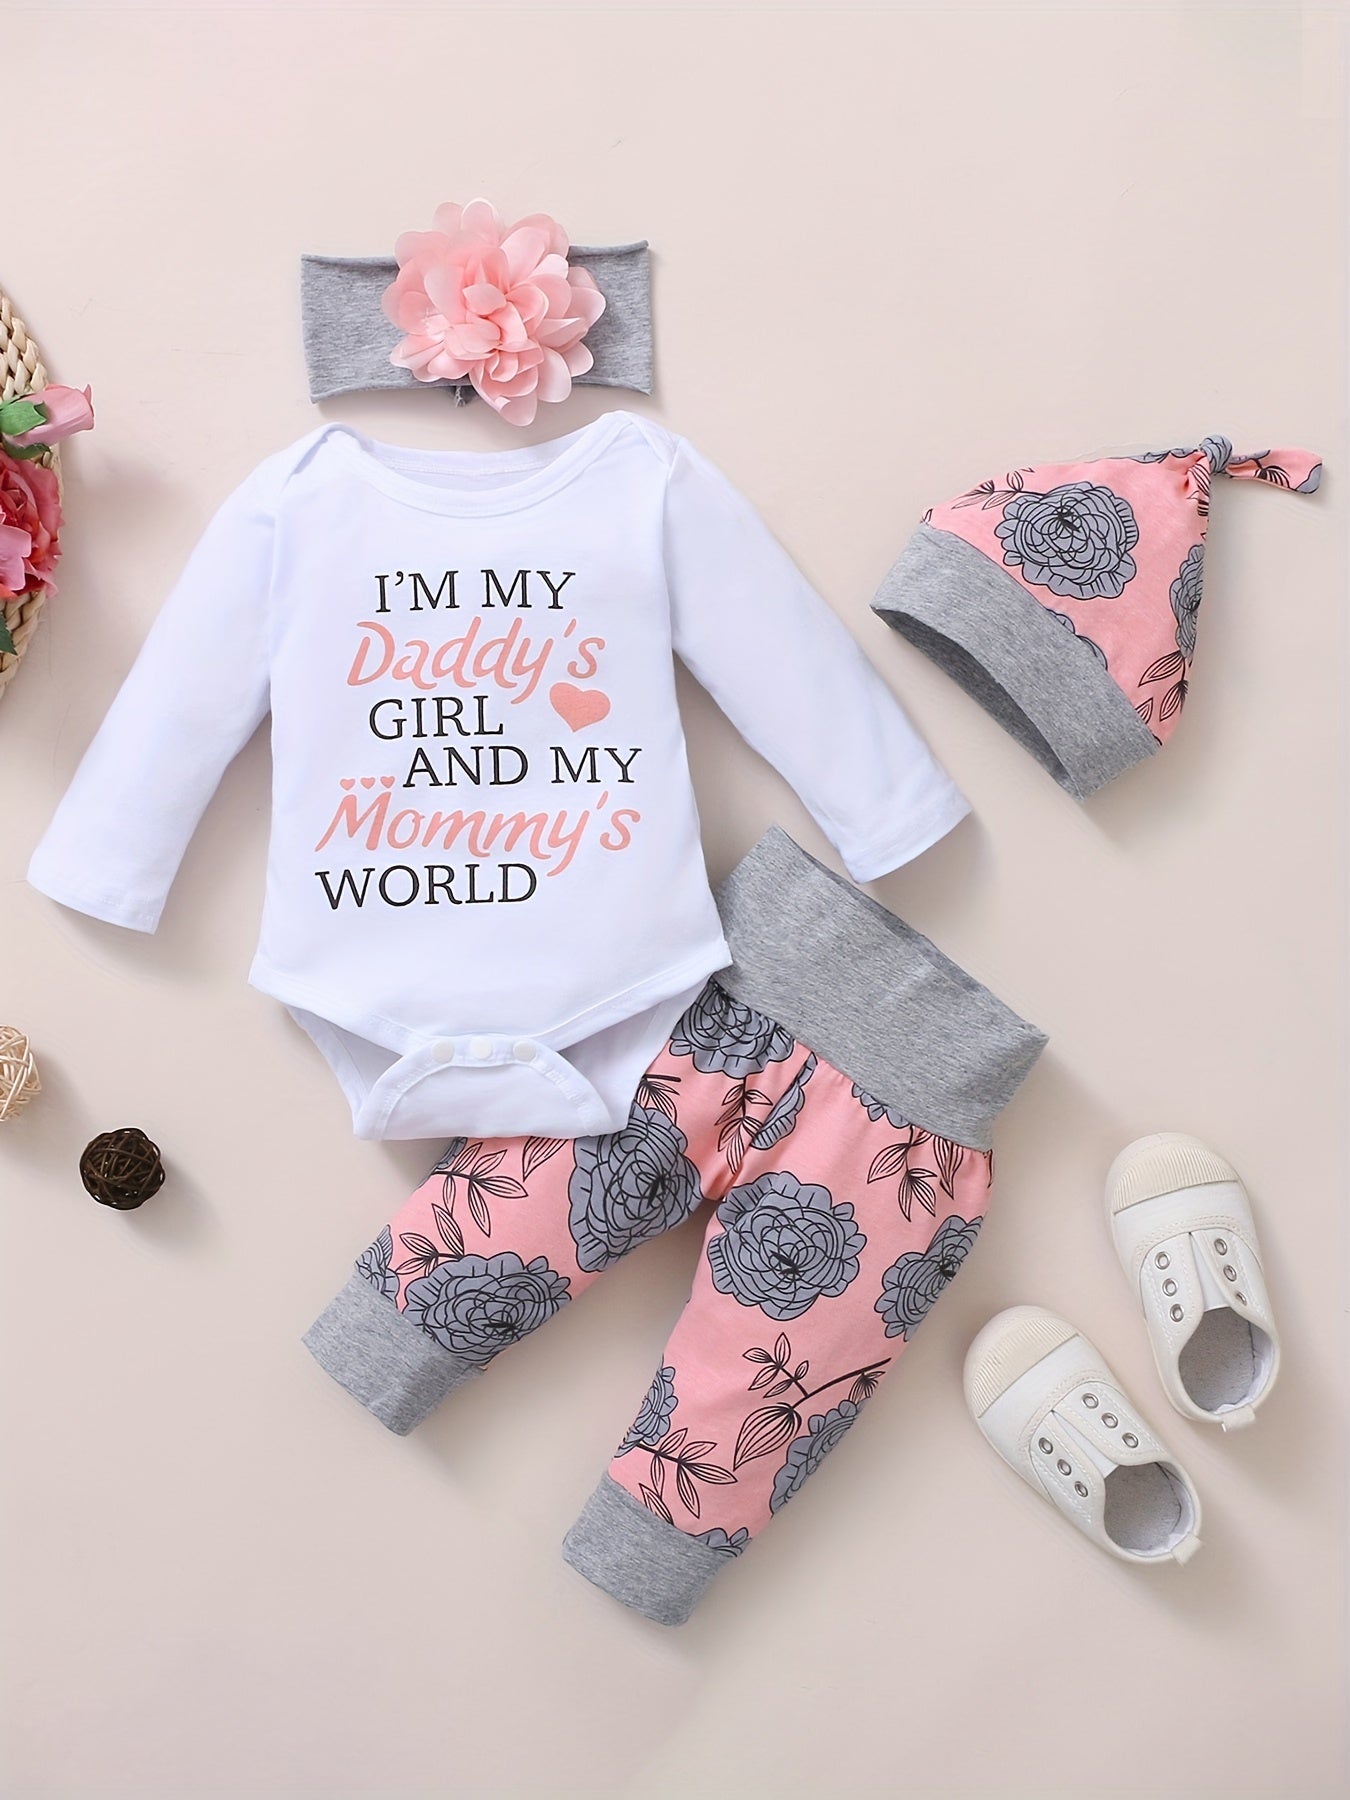 Infant Baby Comfy & Cute Outfit - Letter Graphic Romper + Floral Print Pants + Headband  Set